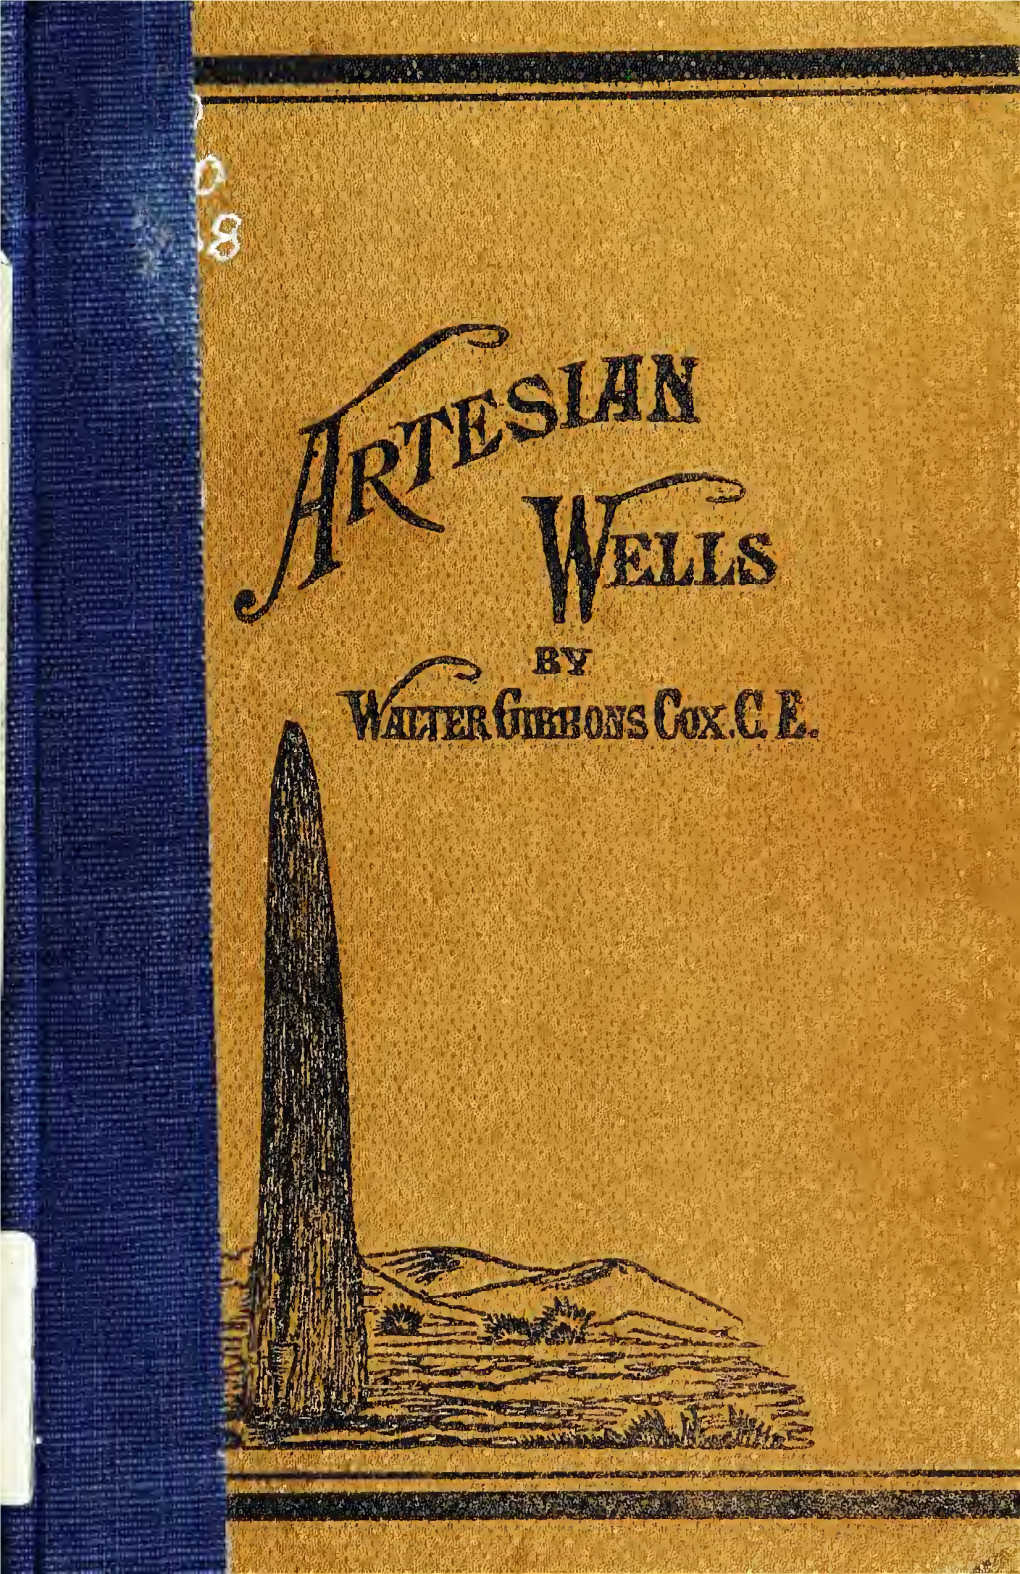 Artesian Wells As a Means of Water Supply